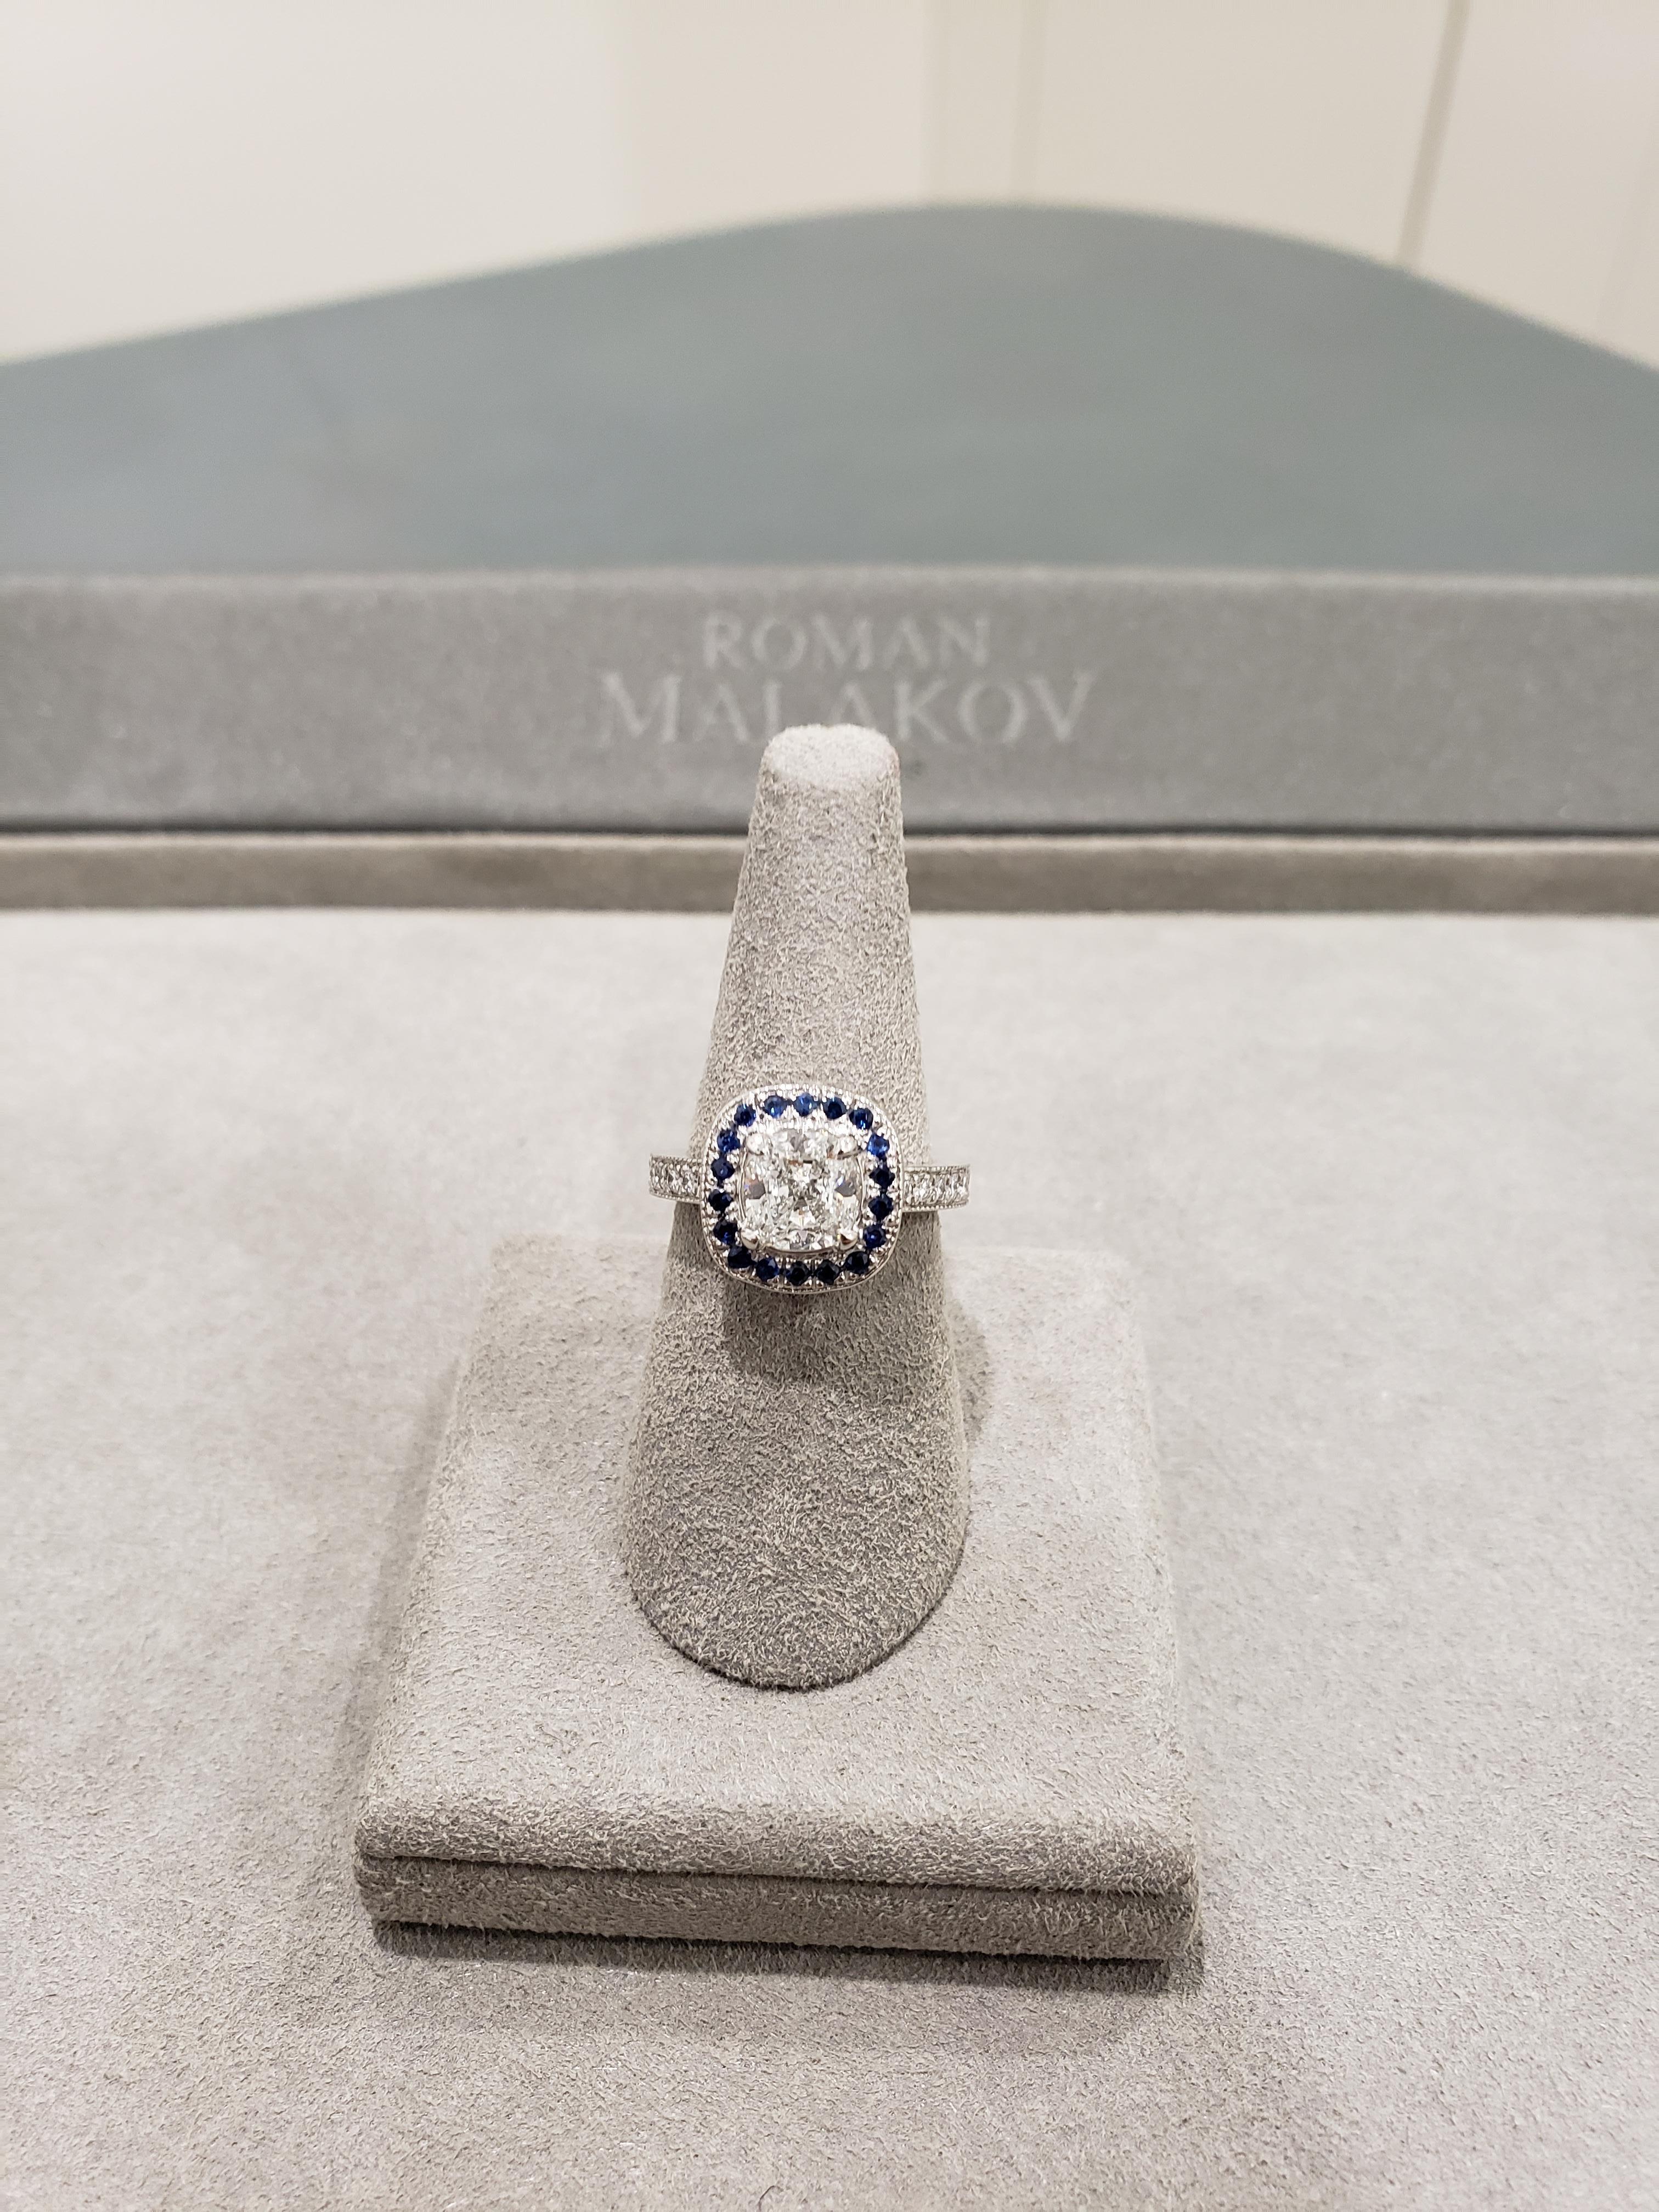 GIA Certified 1.42 Carat Cushion Cut Diamond with Sapphire Halo Engagement Ring  In Excellent Condition For Sale In New York, NY